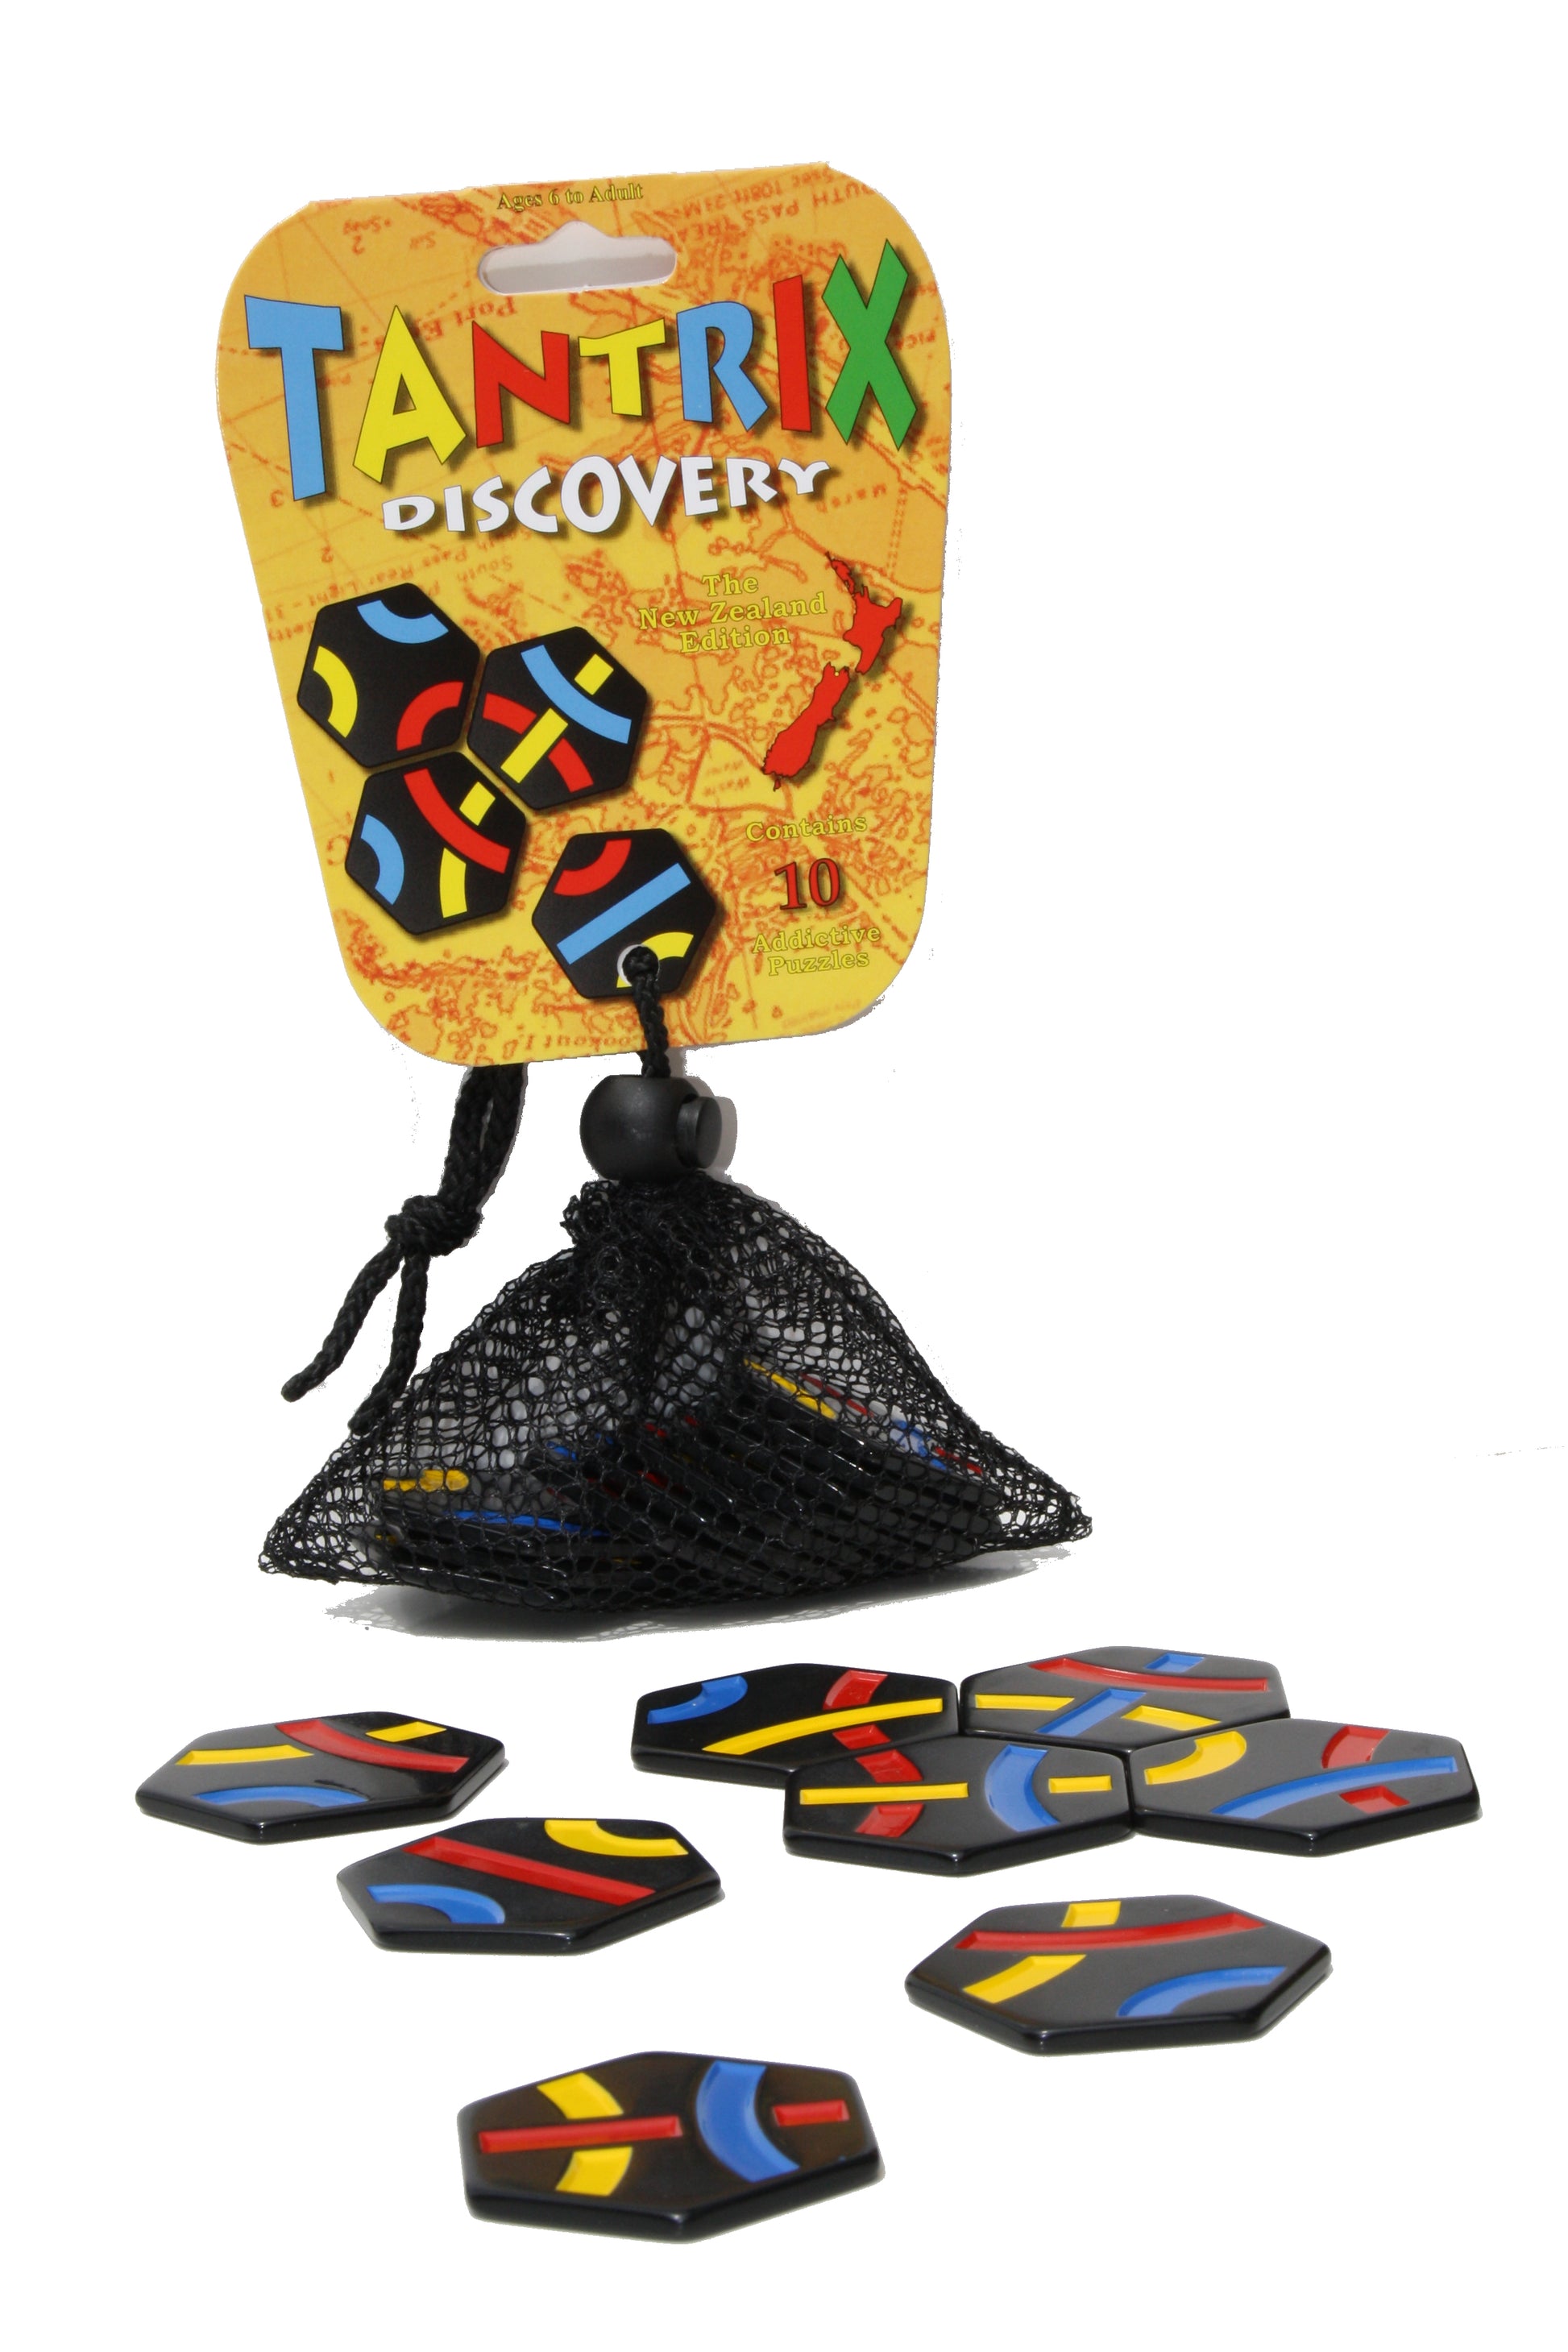 Tantrix Discovery Puzzle Game